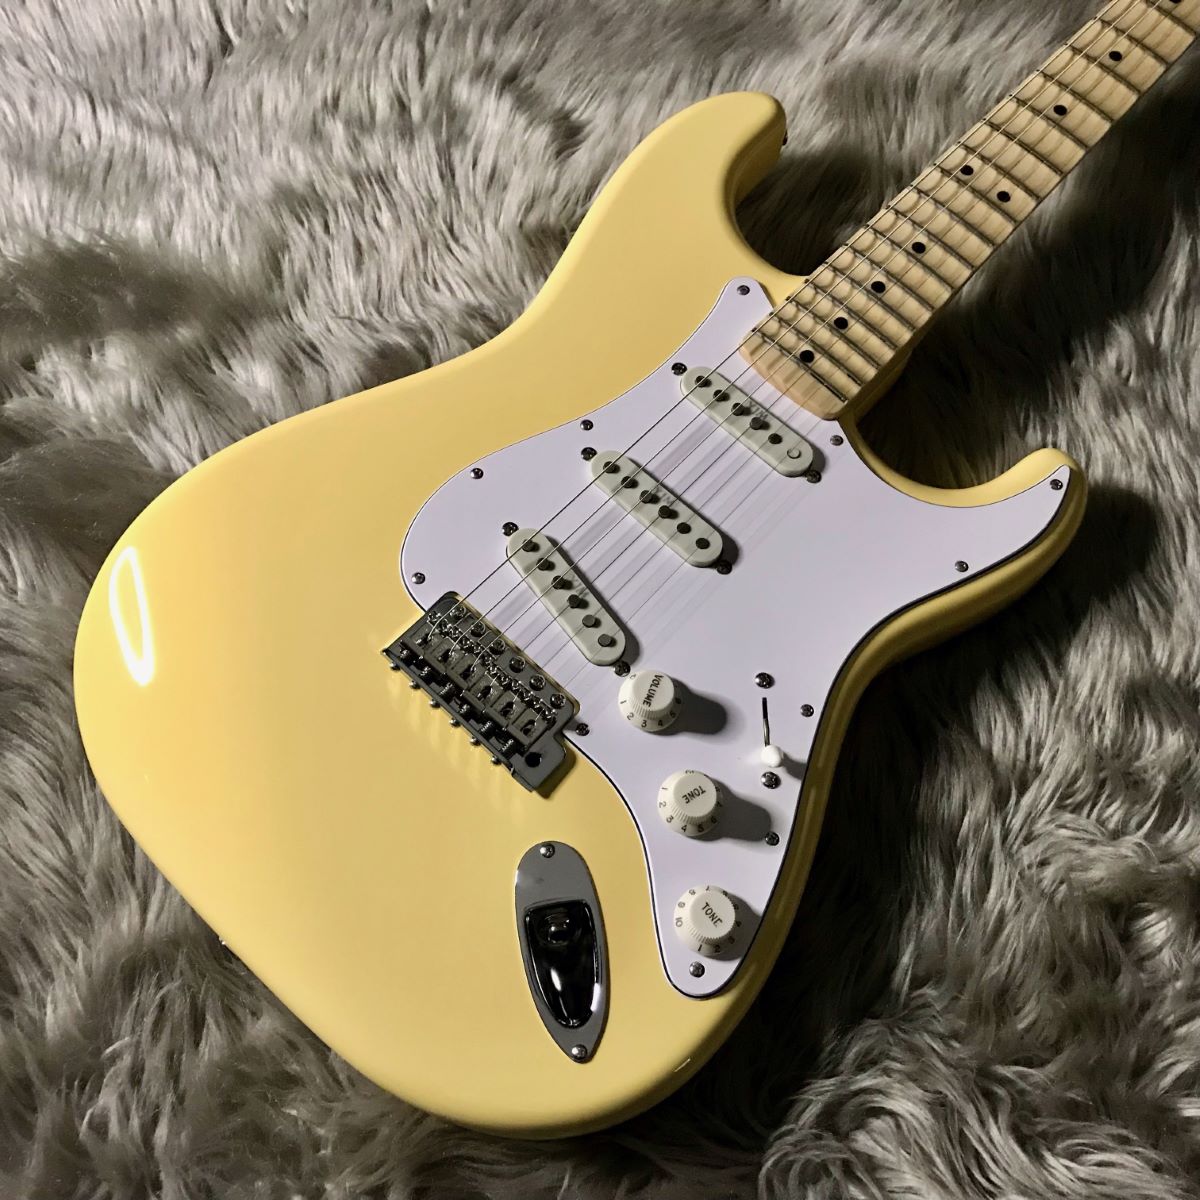 Fender Yngwie Malmsteen Stratocaster Yellow White エレキギター